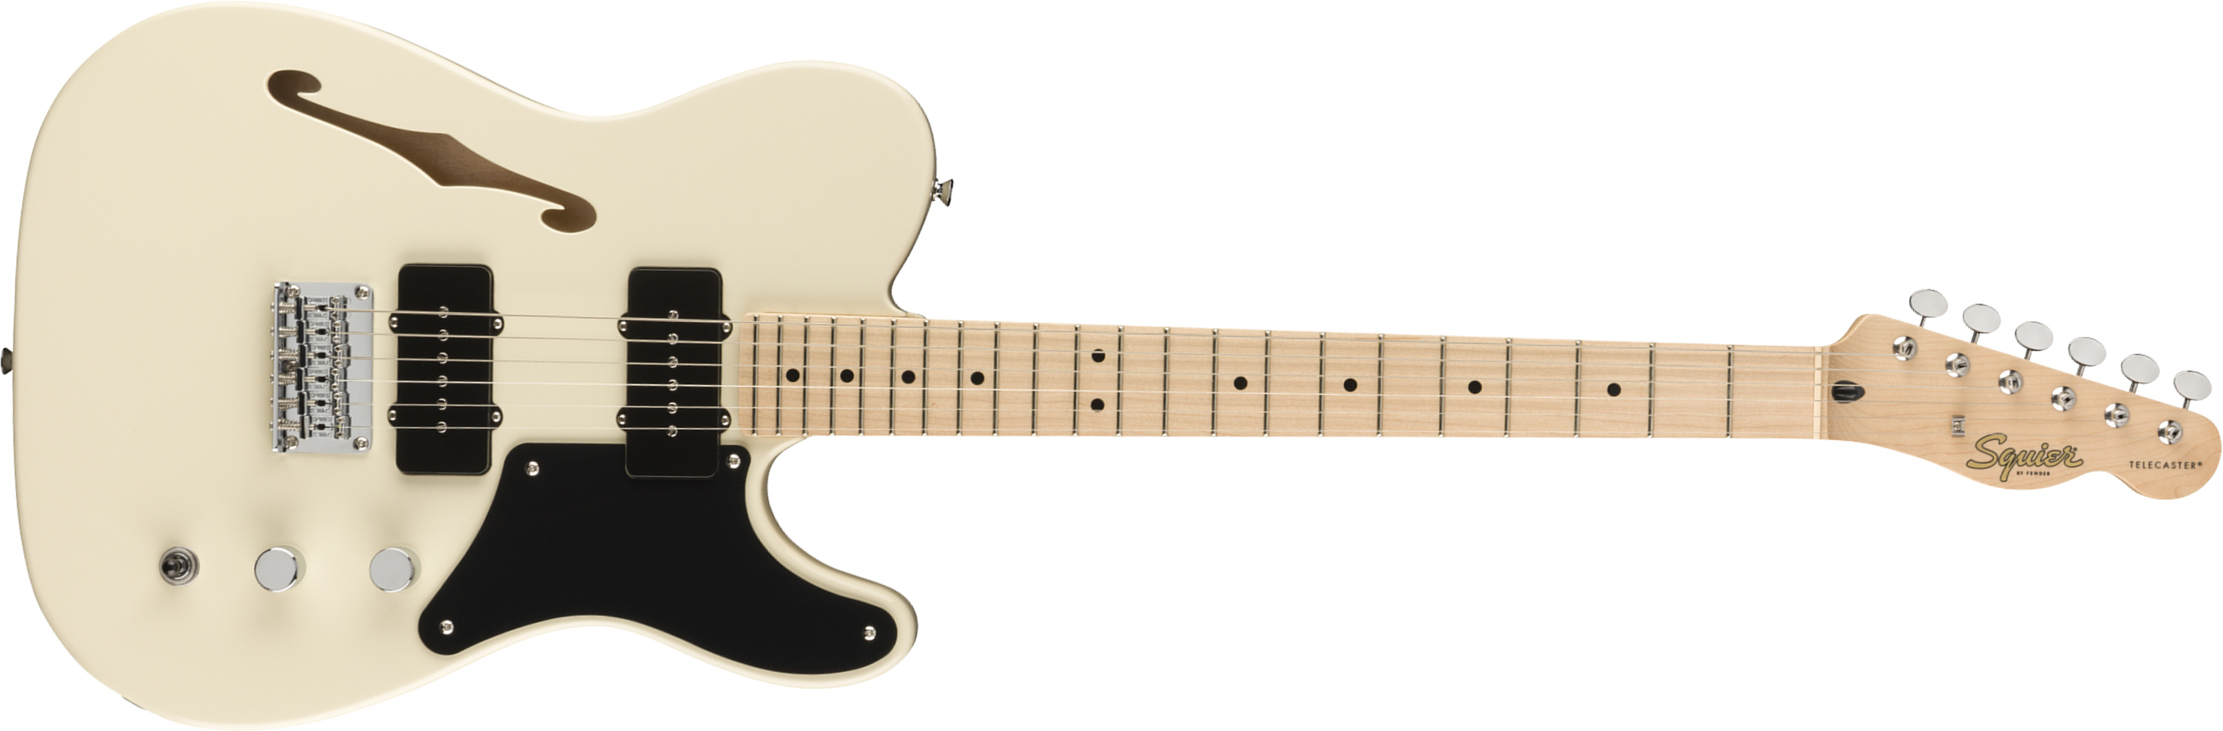 Squier Tele Thinline Cabronita Paranormal Ss Ht Mn - Olympic White - Guitare Électrique Forme Tel - Main picture